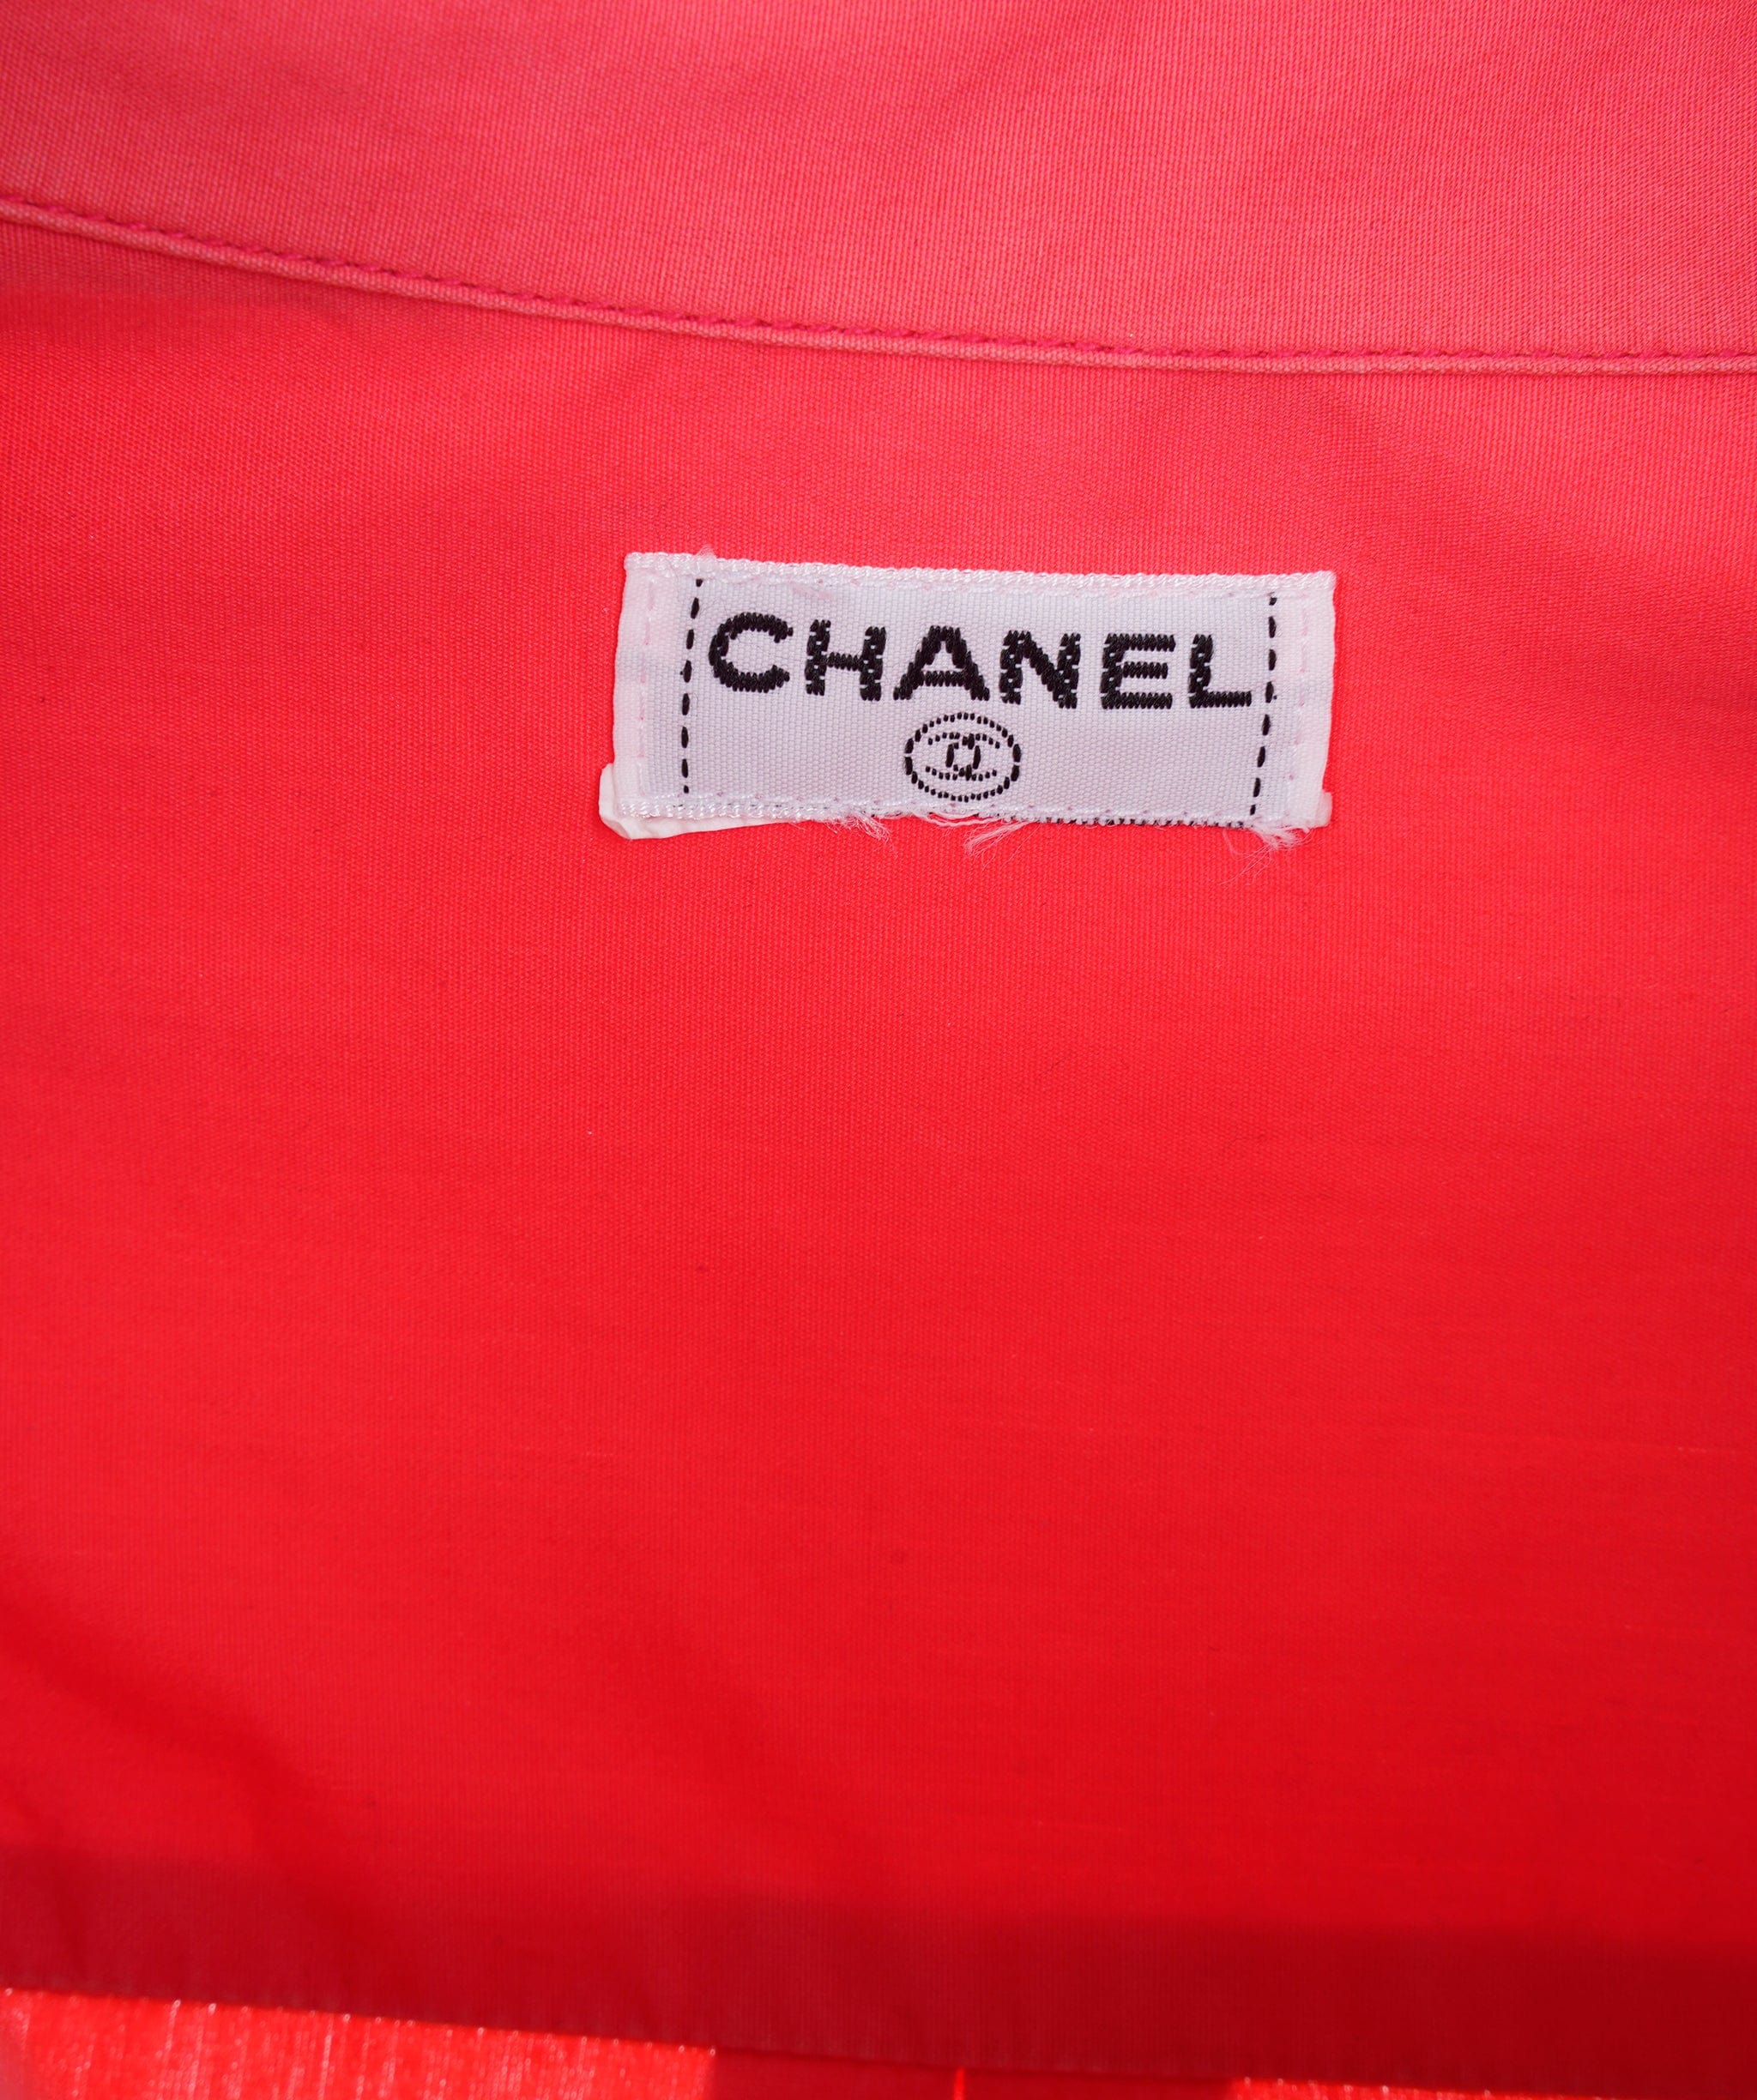 Chanel Chanel Gold CC Buttons Shirt Orange Red ASL5165